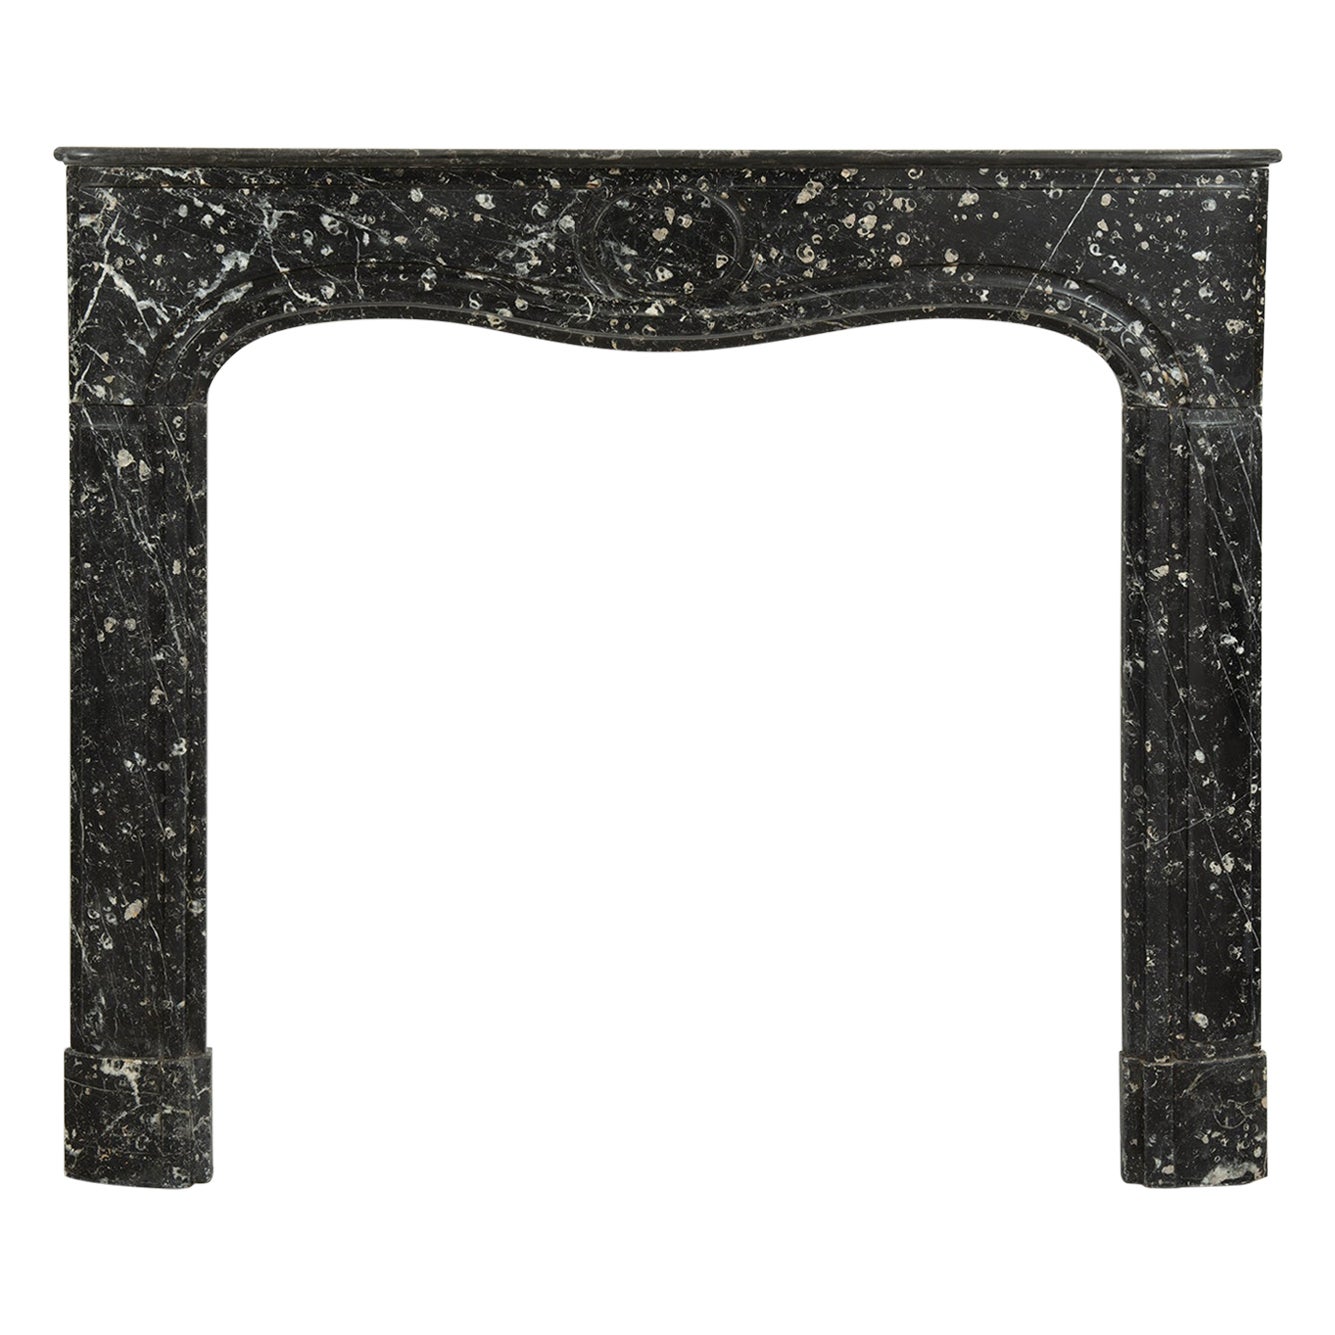 Perfect Antique Marble Fireplace Mantel For Sale